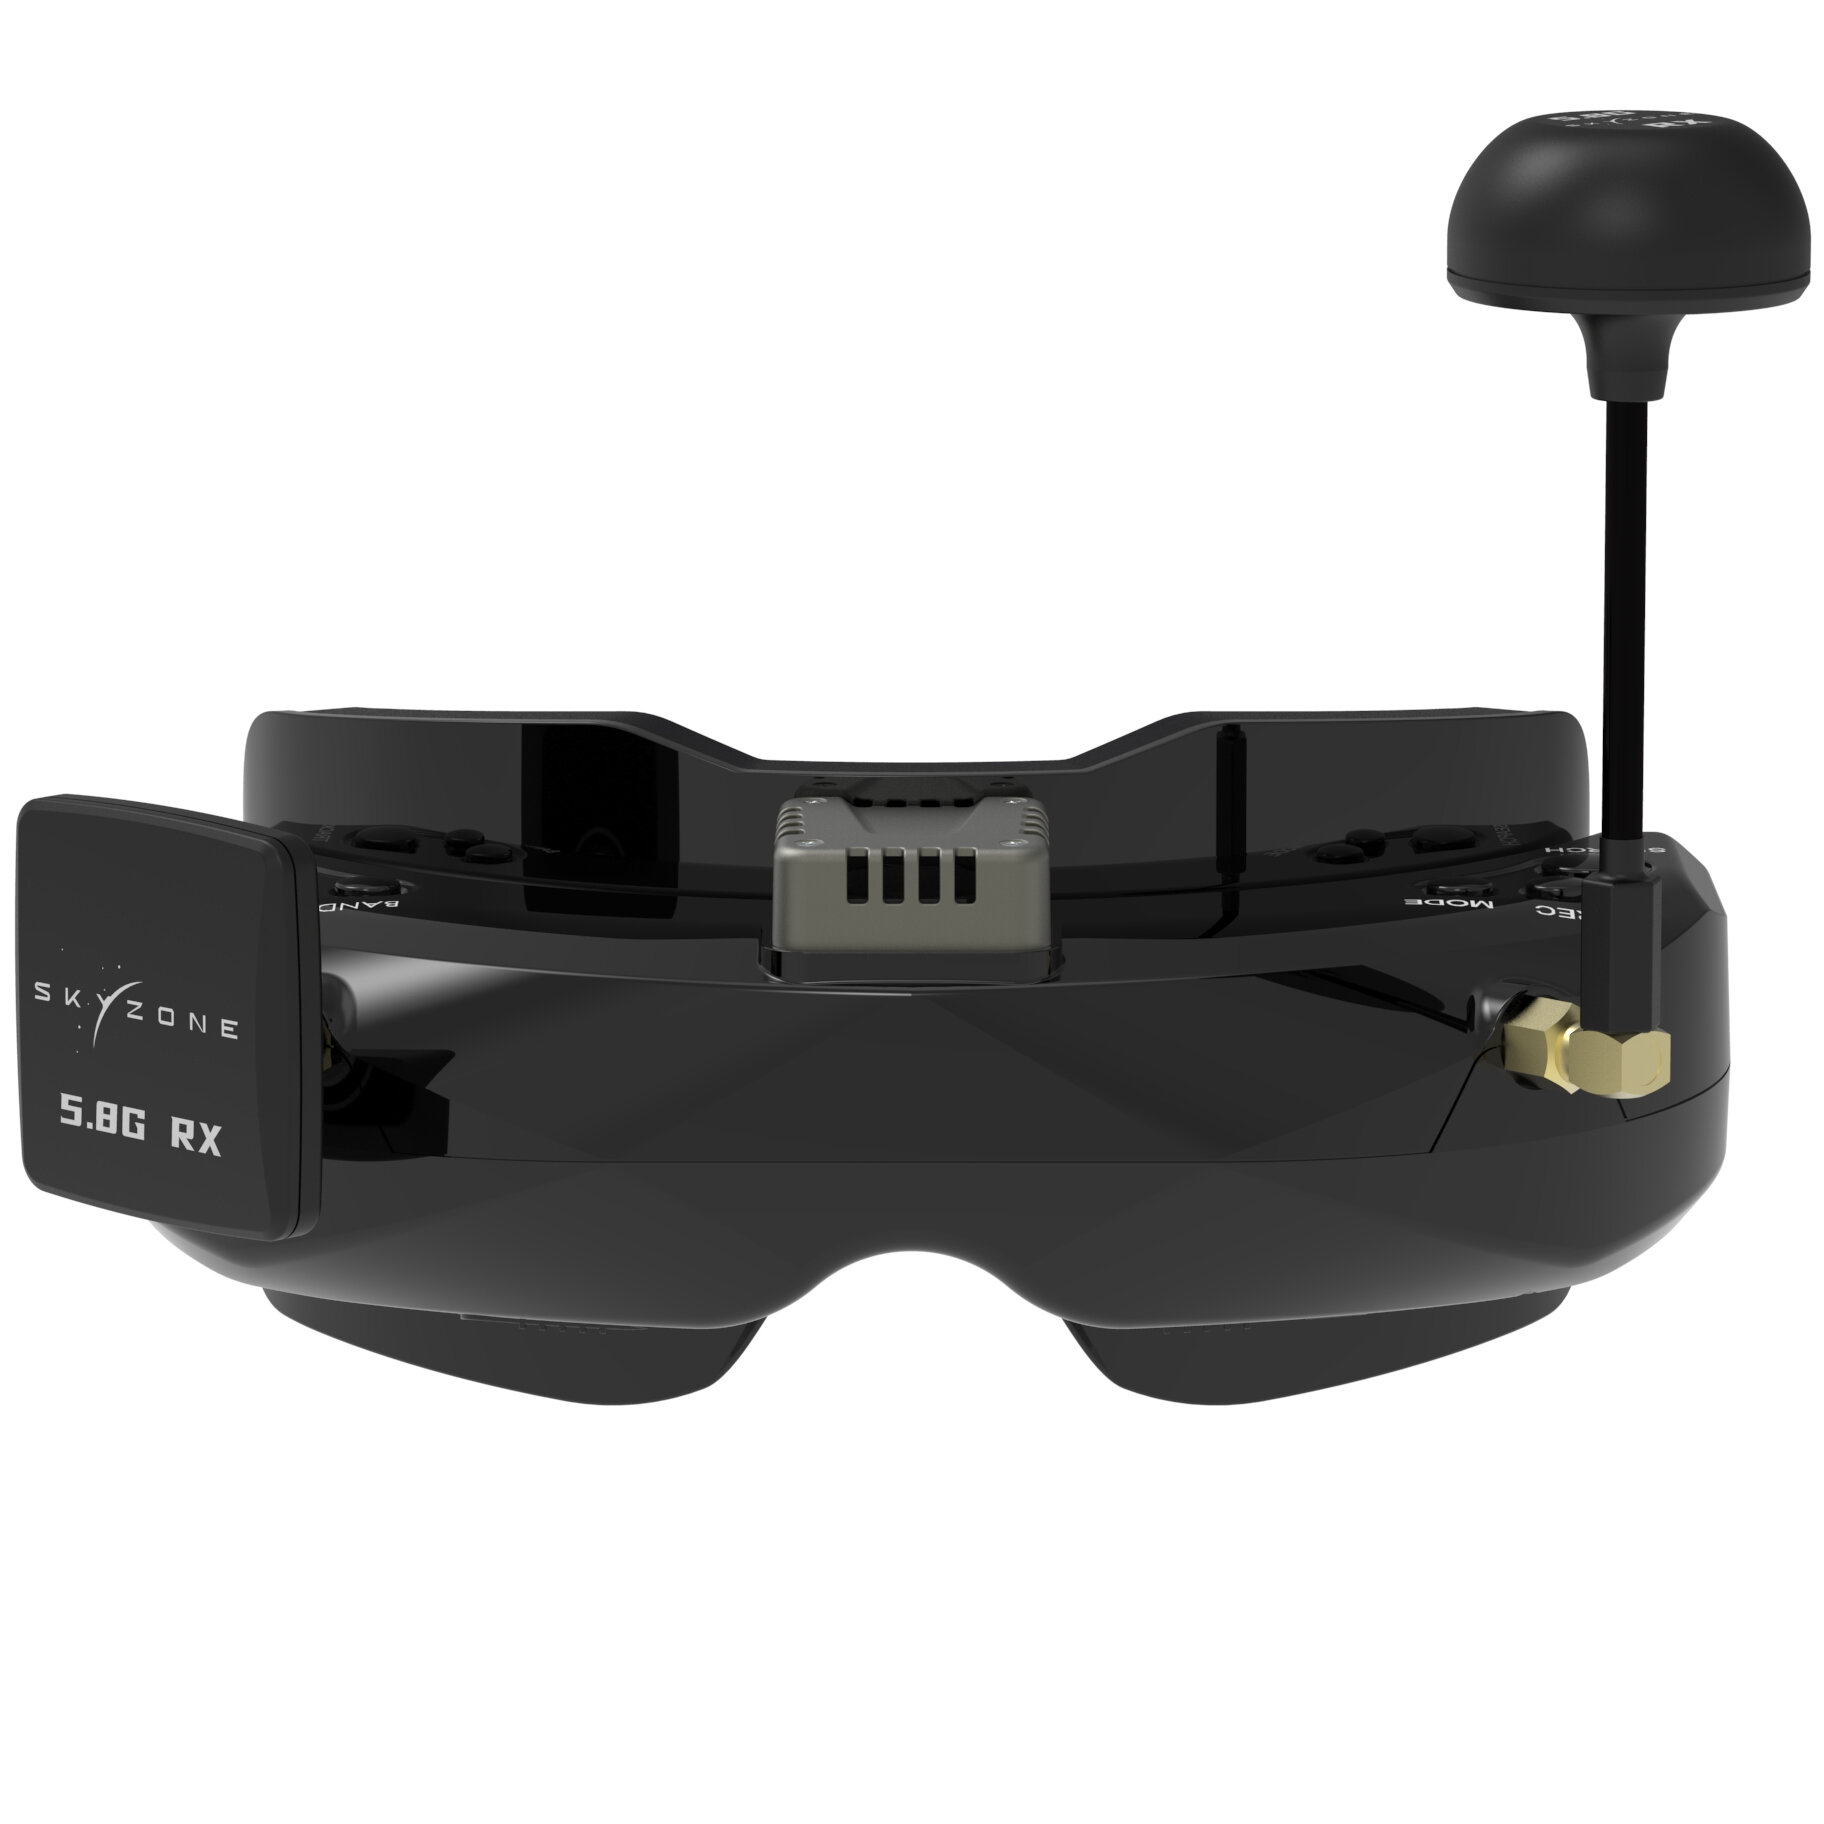 SKYZONE SKY02O FPV Goggles OLED 5.8Ghz SteadyView Diversity RX Built in HeadTracker DVR HDMI AVIN／OUT for RC Racing Drone